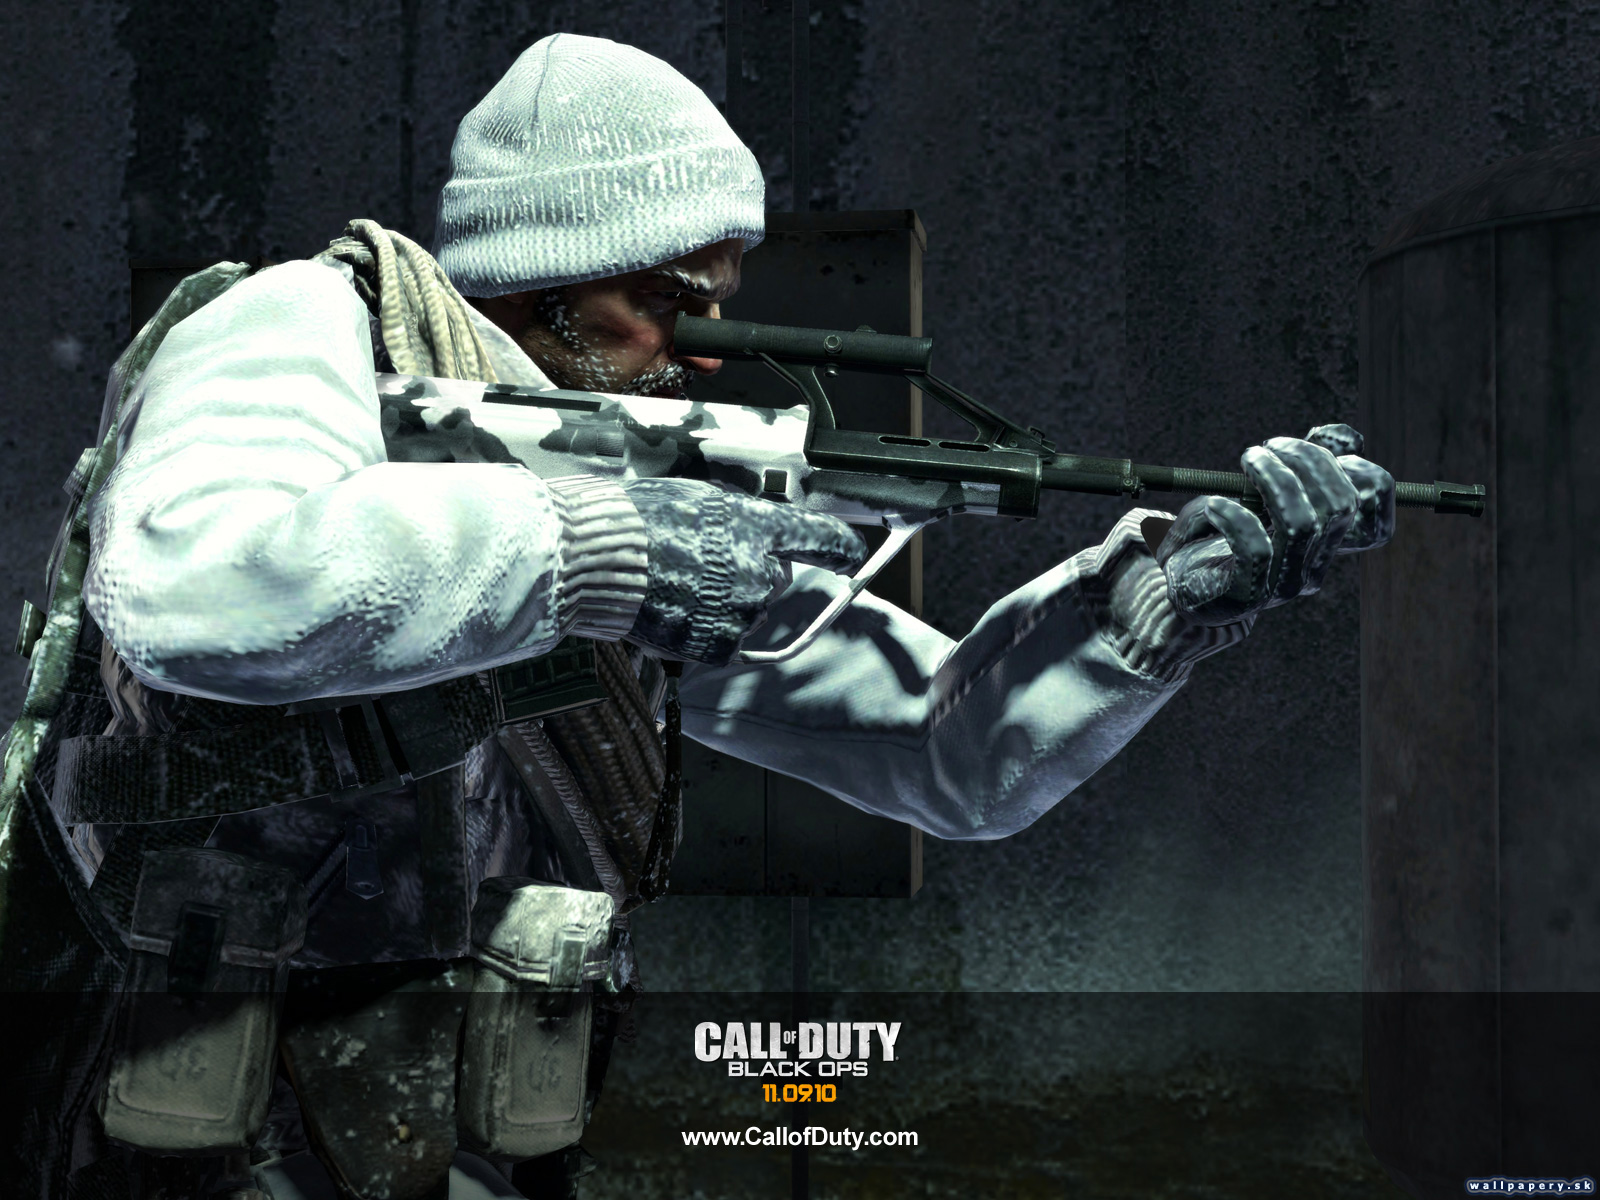 Call of Duty: Black Ops - wallpaper 19